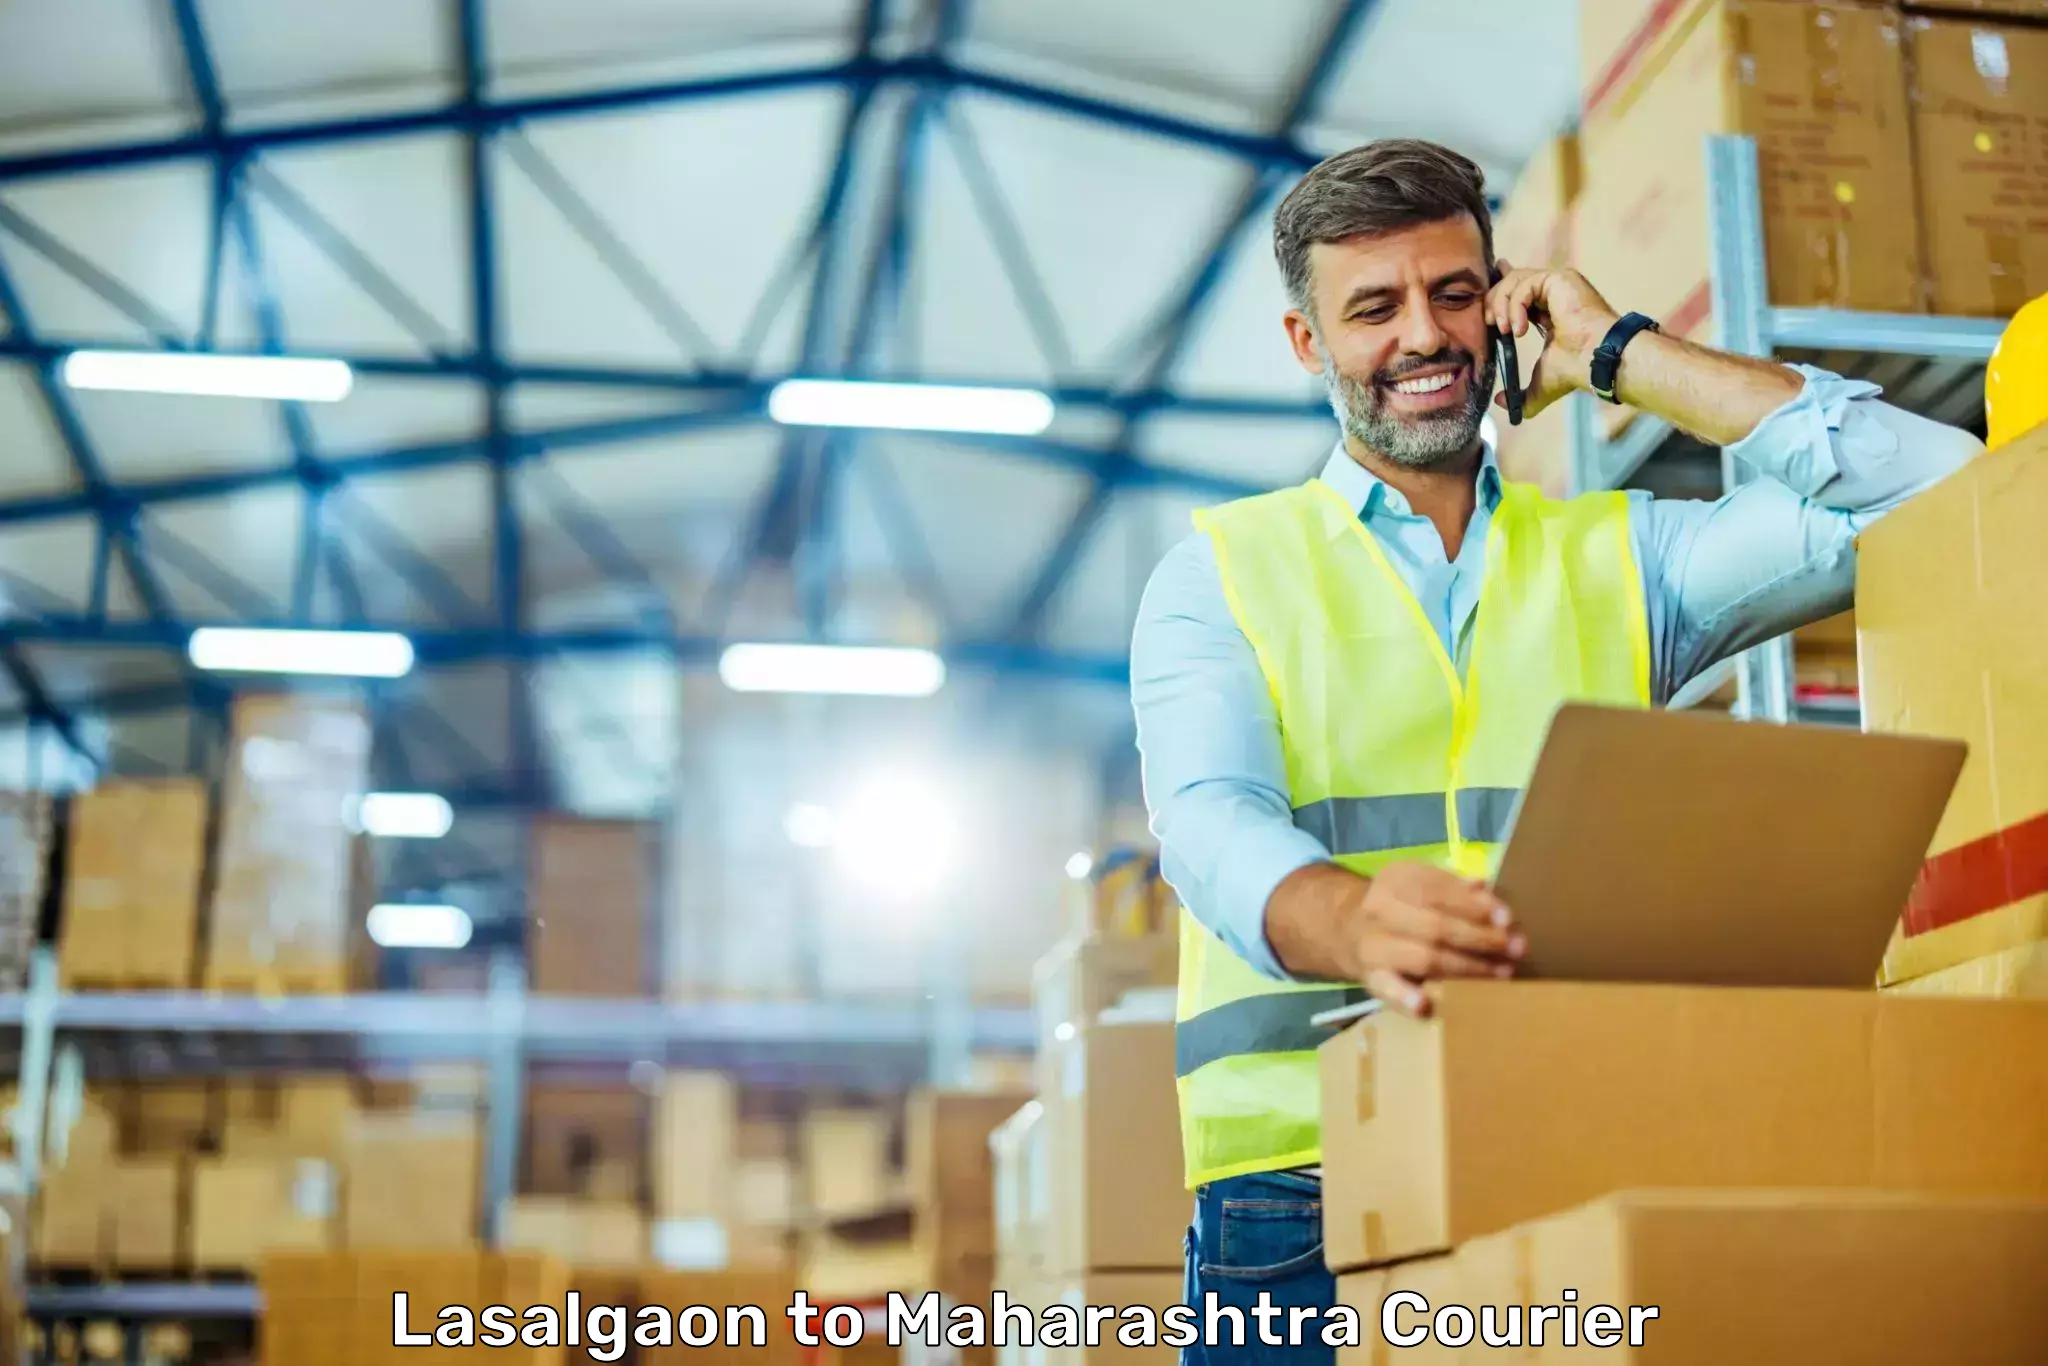 State-of-the-art courier technology Lasalgaon to Solapur